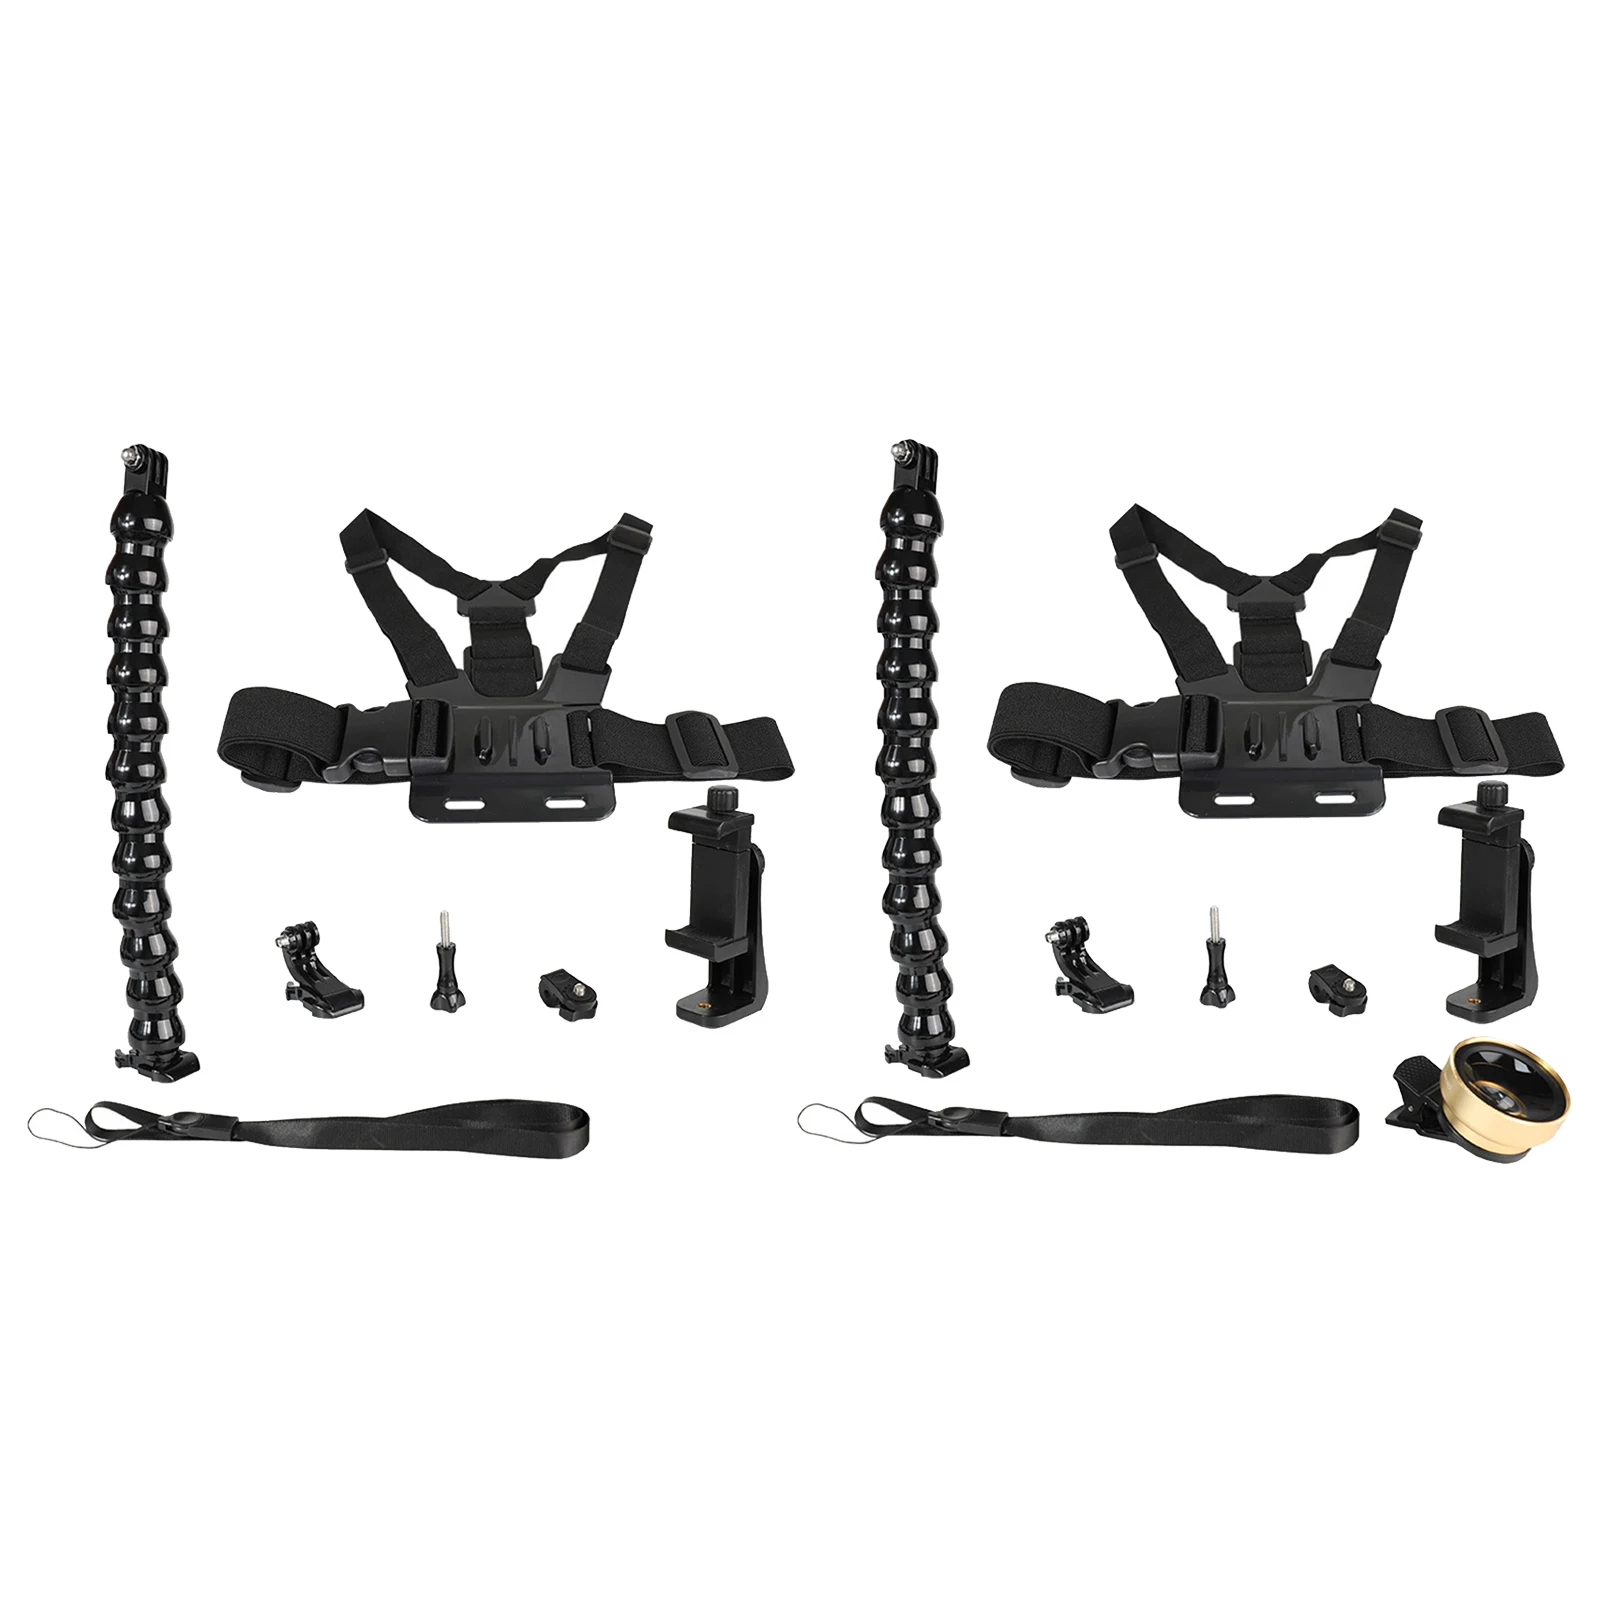 

Universal Chest Mount Harness Fully Adjustable Chest Strap Includes J-Hook / Thumbscrew for Mobile Phones for Travel on Foot